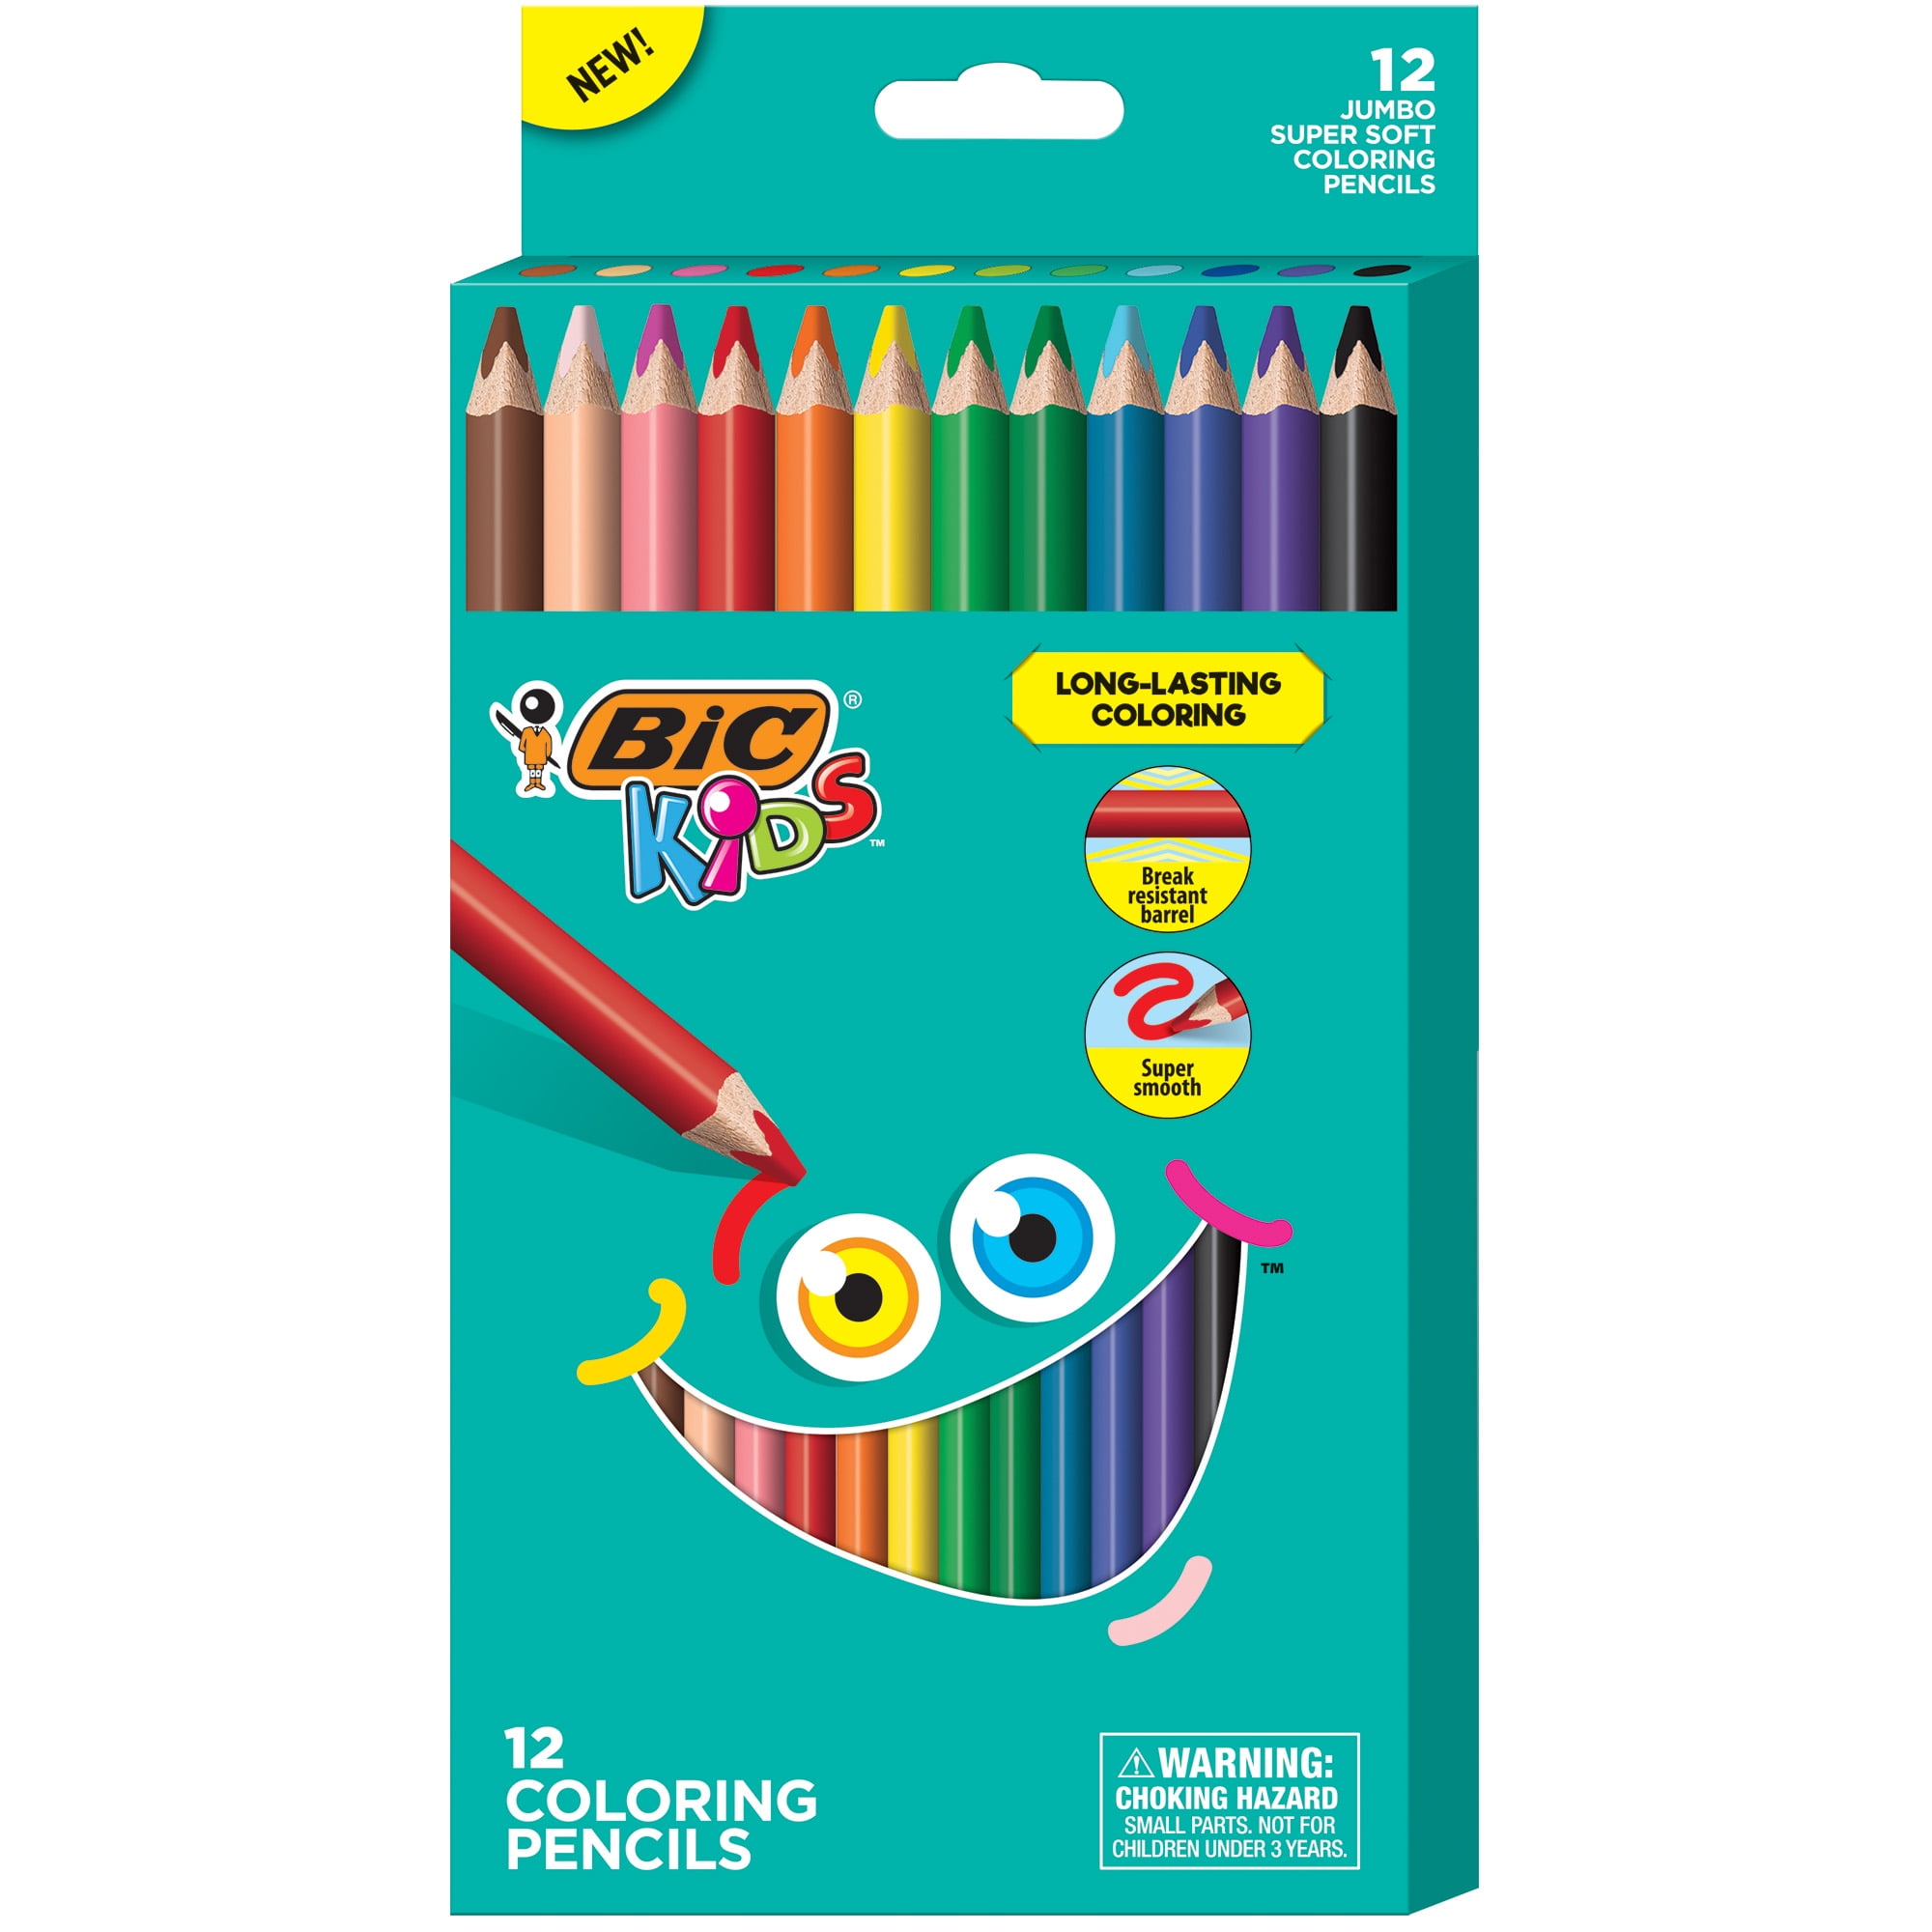 20 Packs Bic Kids Colour and Erase Pens 8 4 Packs of 12 pens x 2 